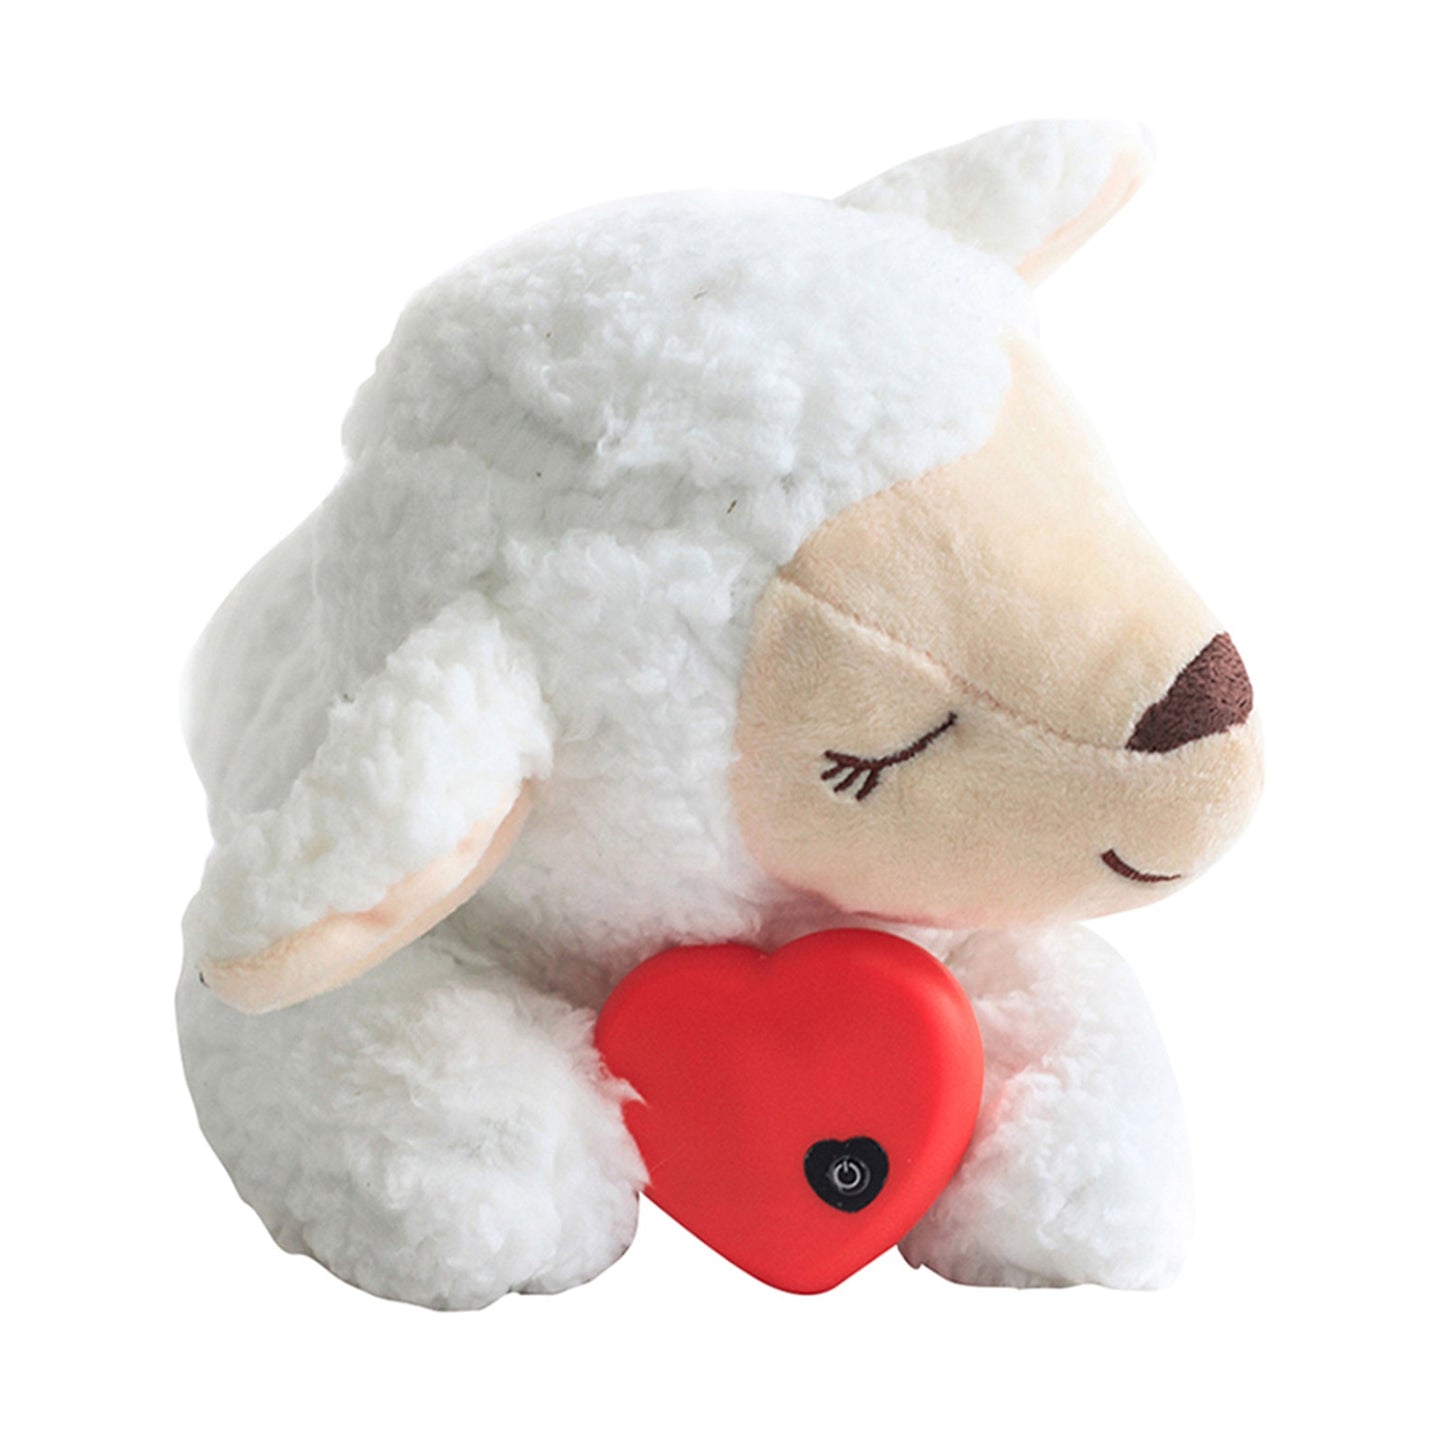 Calming plush for pets. The dog that will no longer make your puppy feel alone.